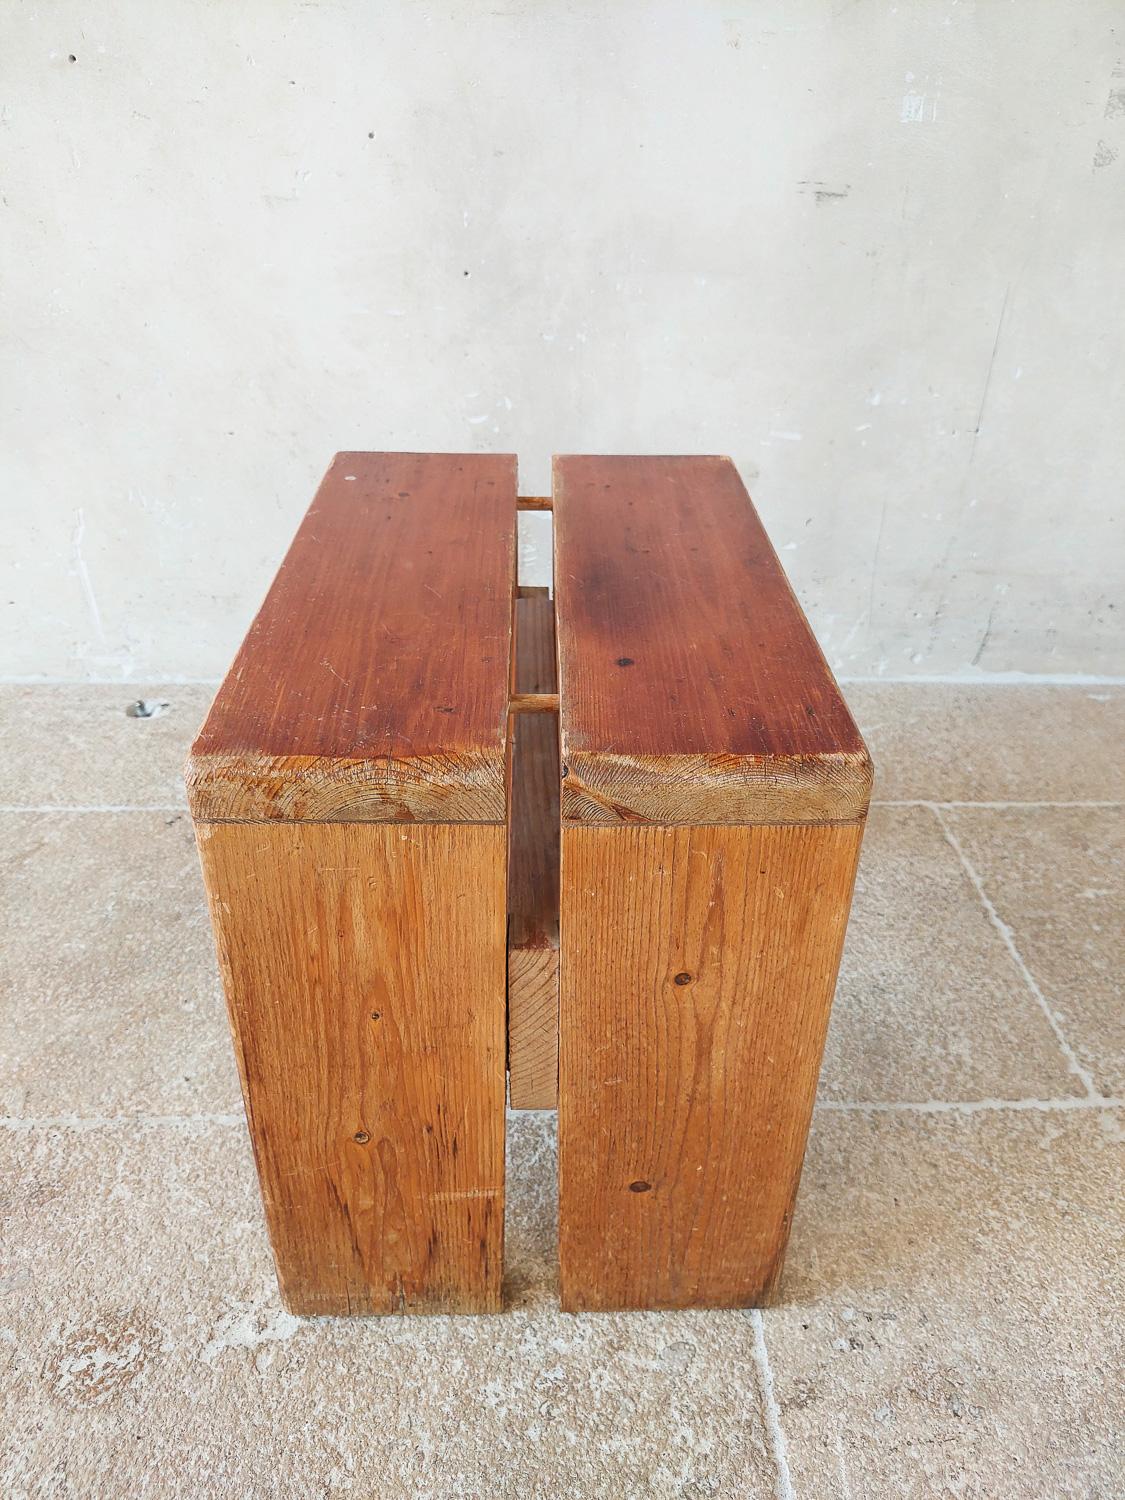 Charlotte Perriand Pine Wood Stool for Les Arcs, 1960s For Sale 5